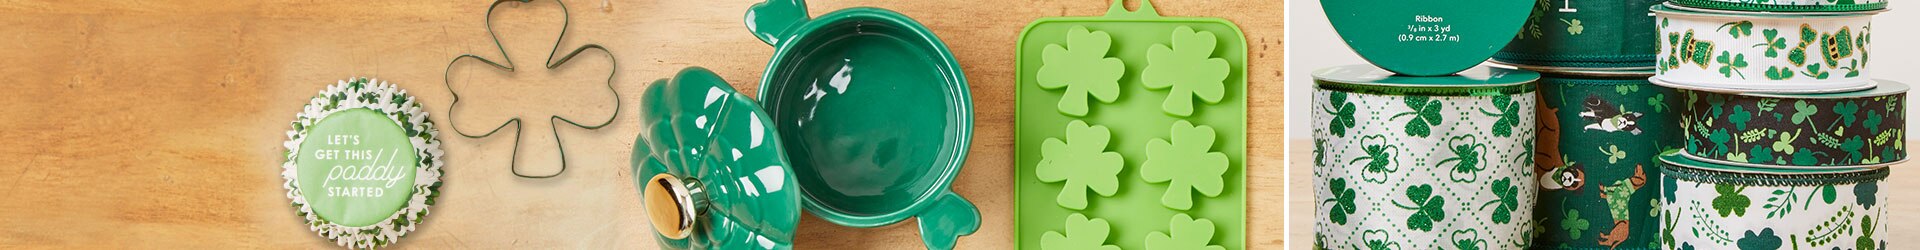 St. Patrick's Day kitchenware and ribbon from Joann Stores